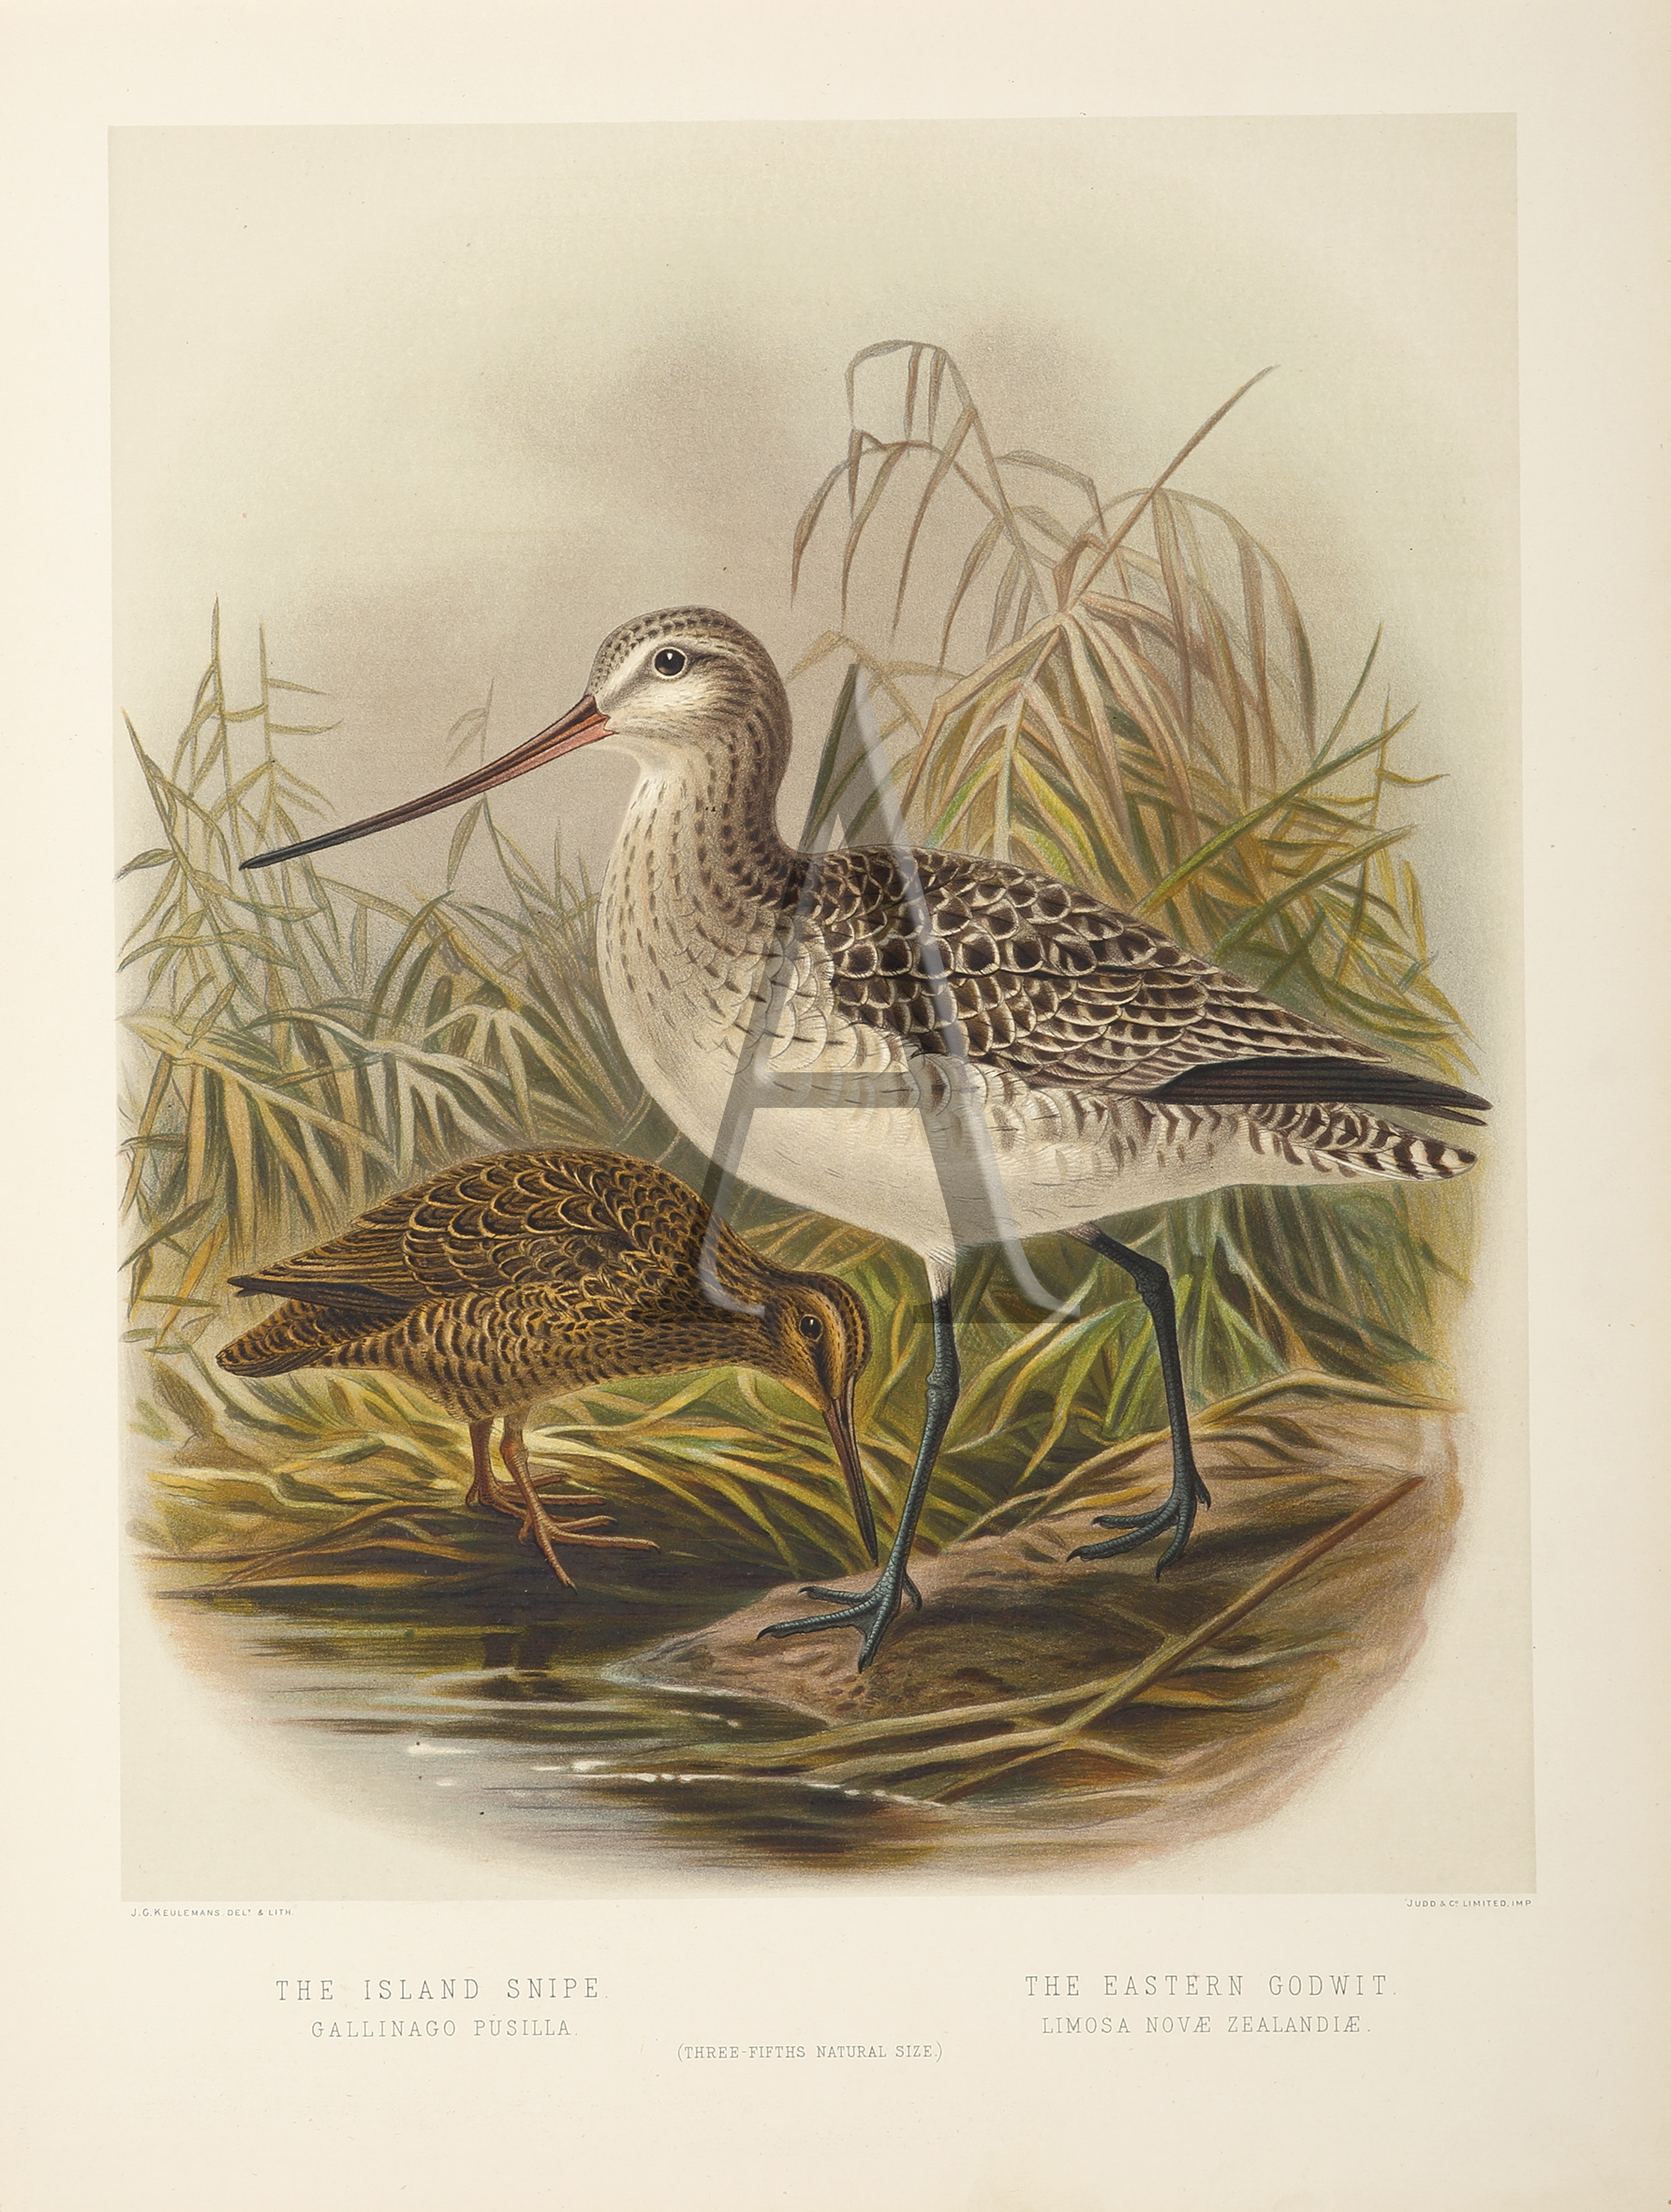 The Island Snipe - The Eastern Godwit. - Antique Print from 1888